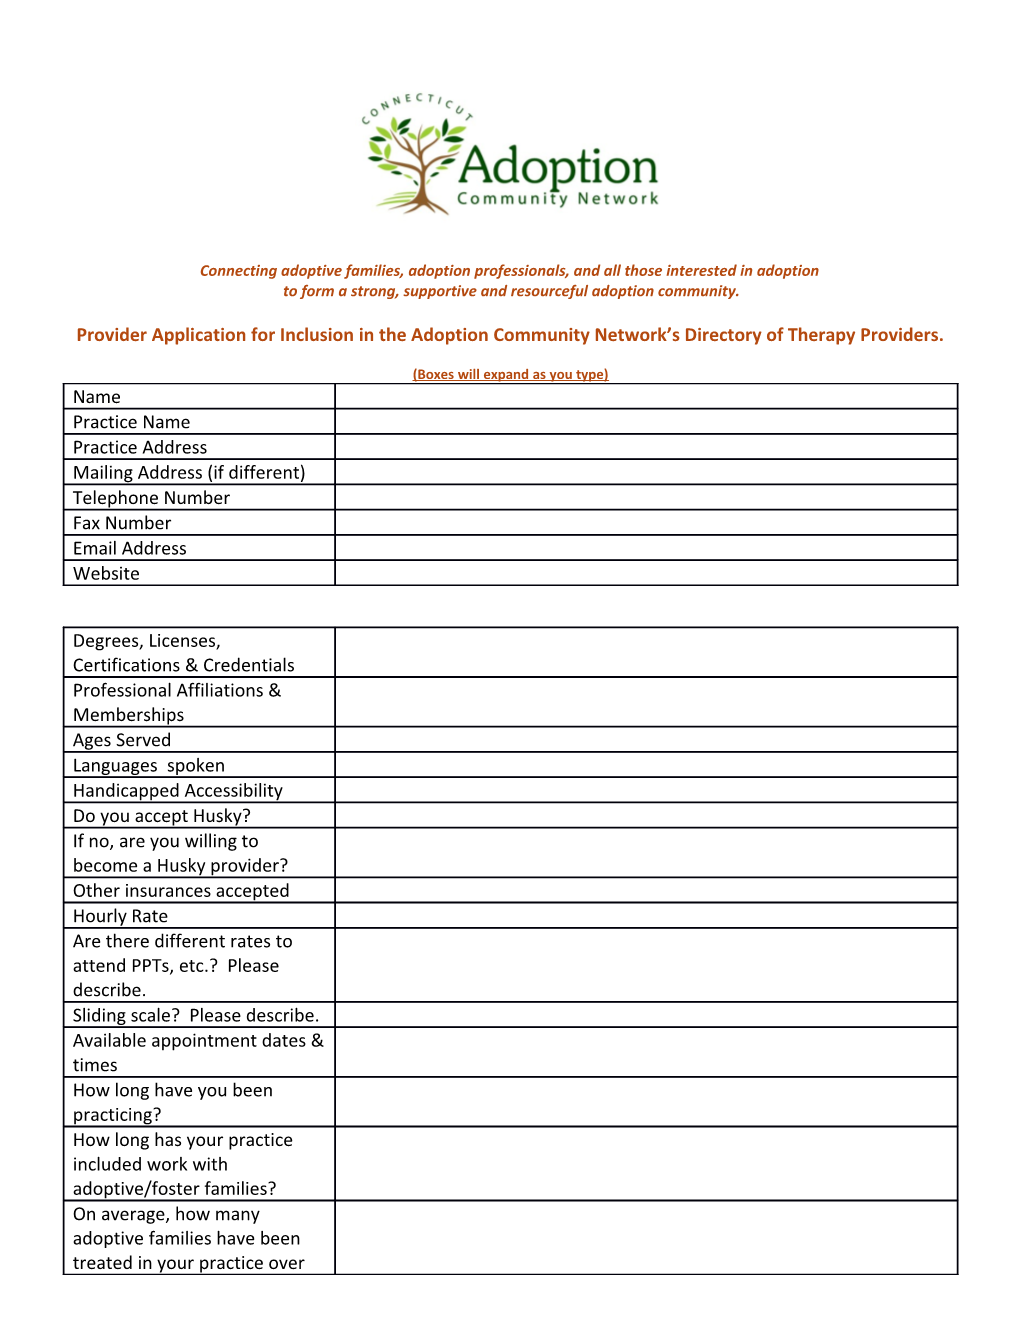 Connecting Adoptive Families, Adoption Professionals, and All Those Interested in Adoption